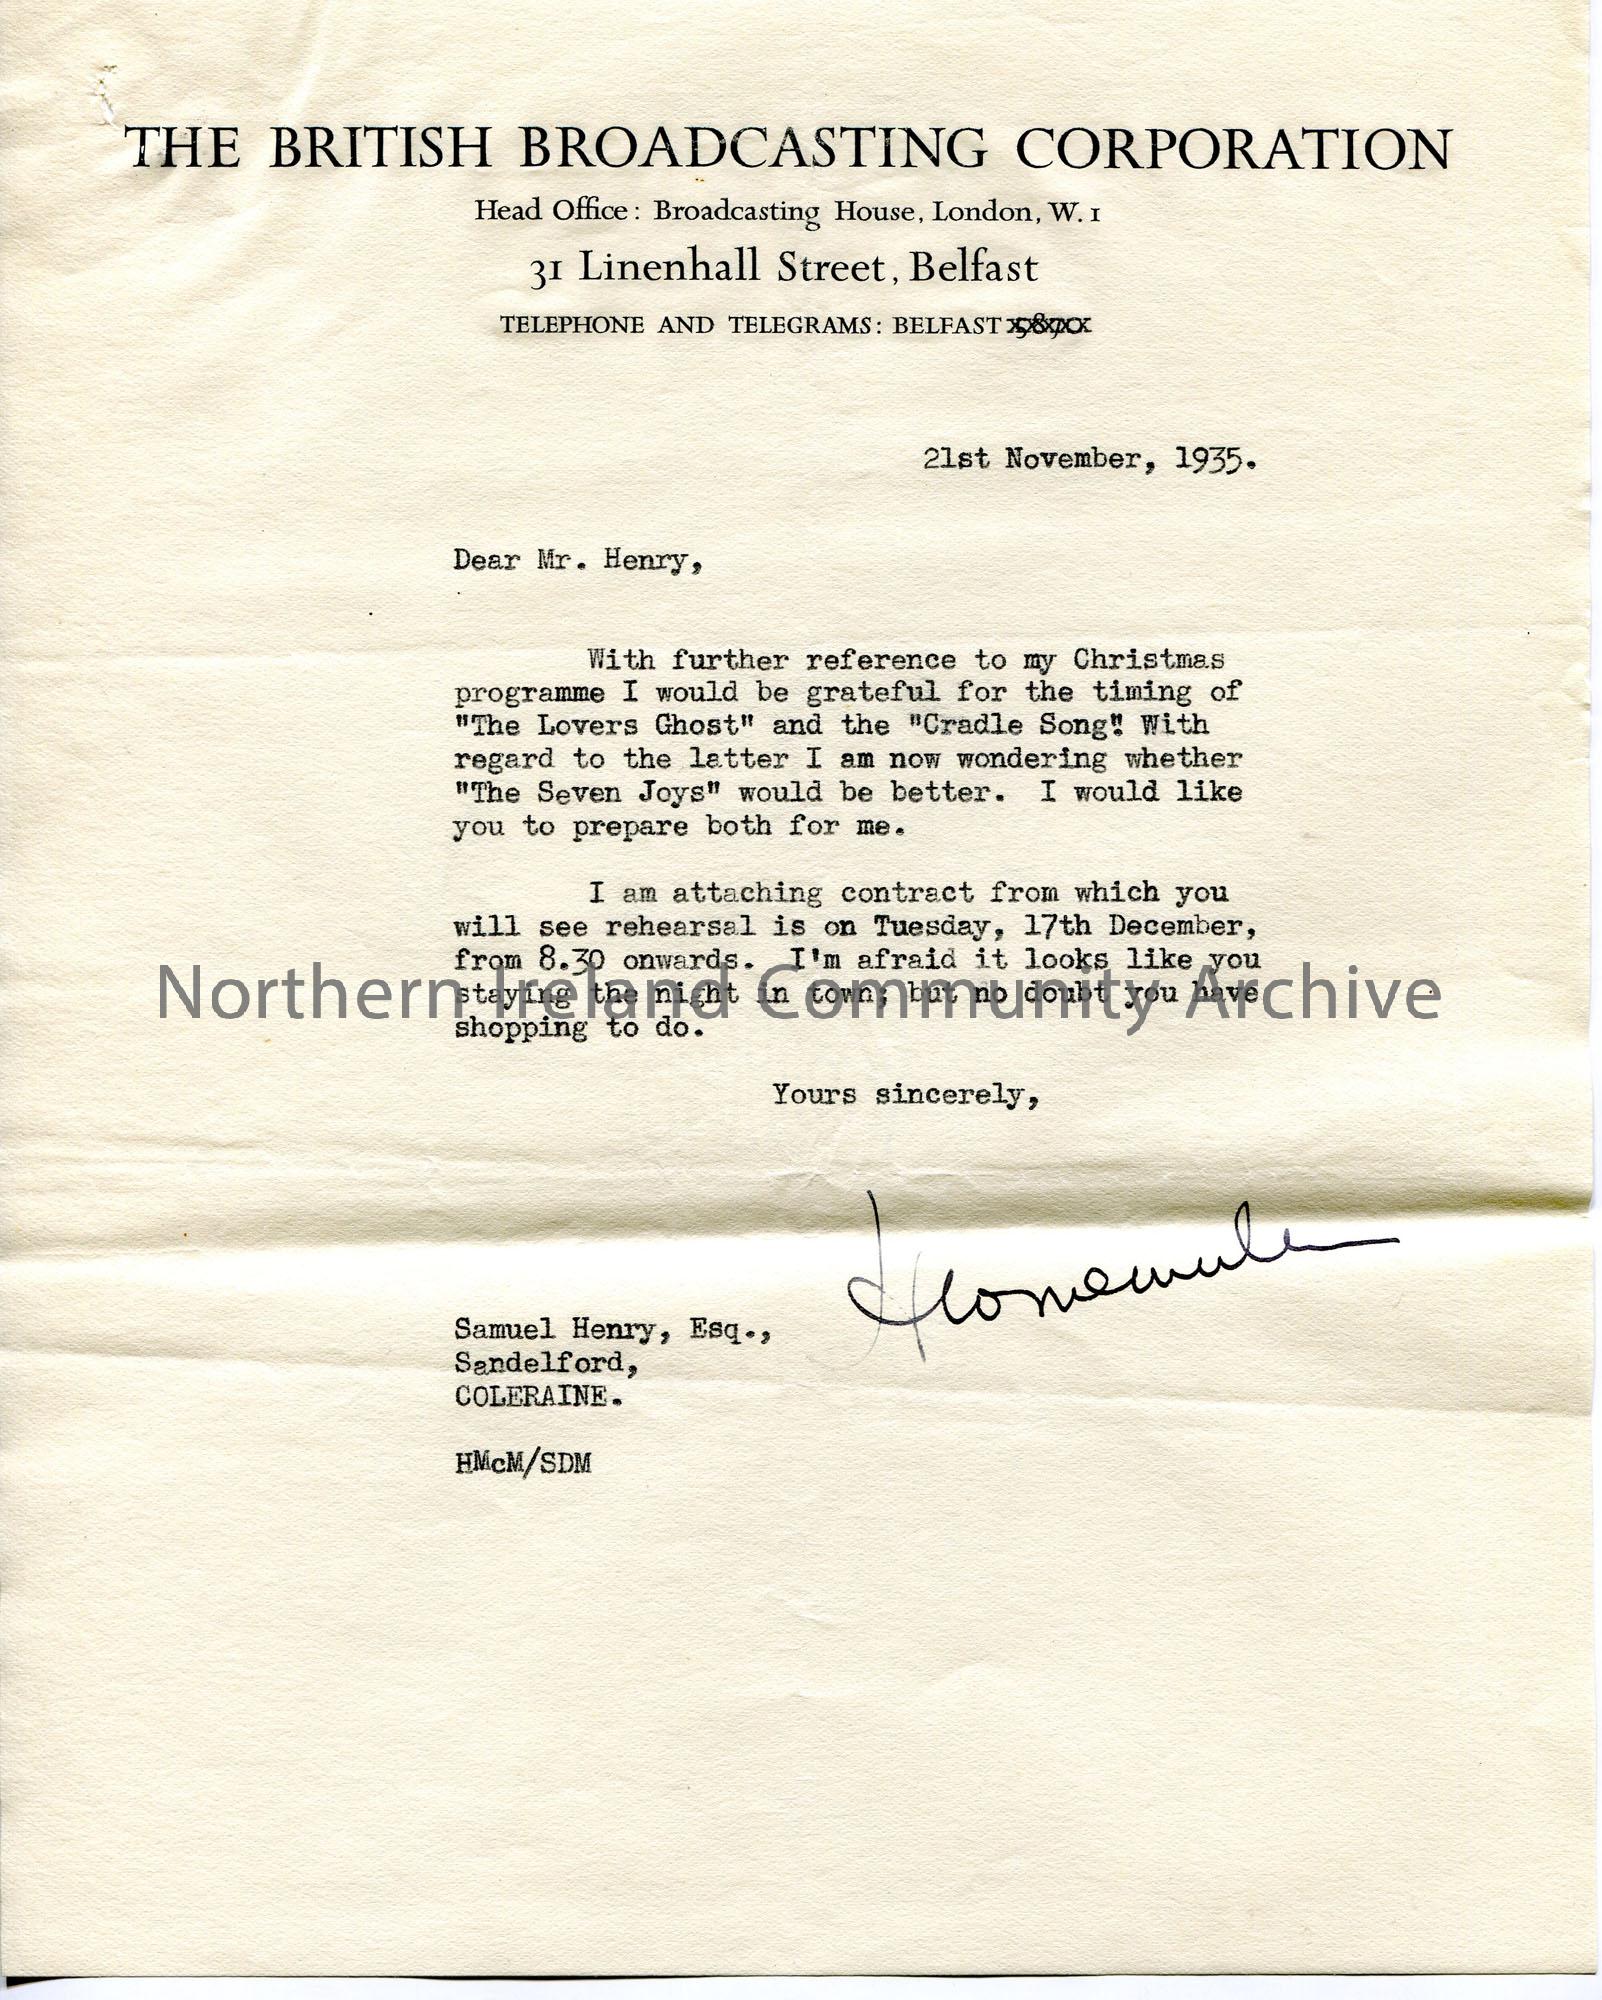 Letter from H W McMullan of the BBC, dated 21.11.1935